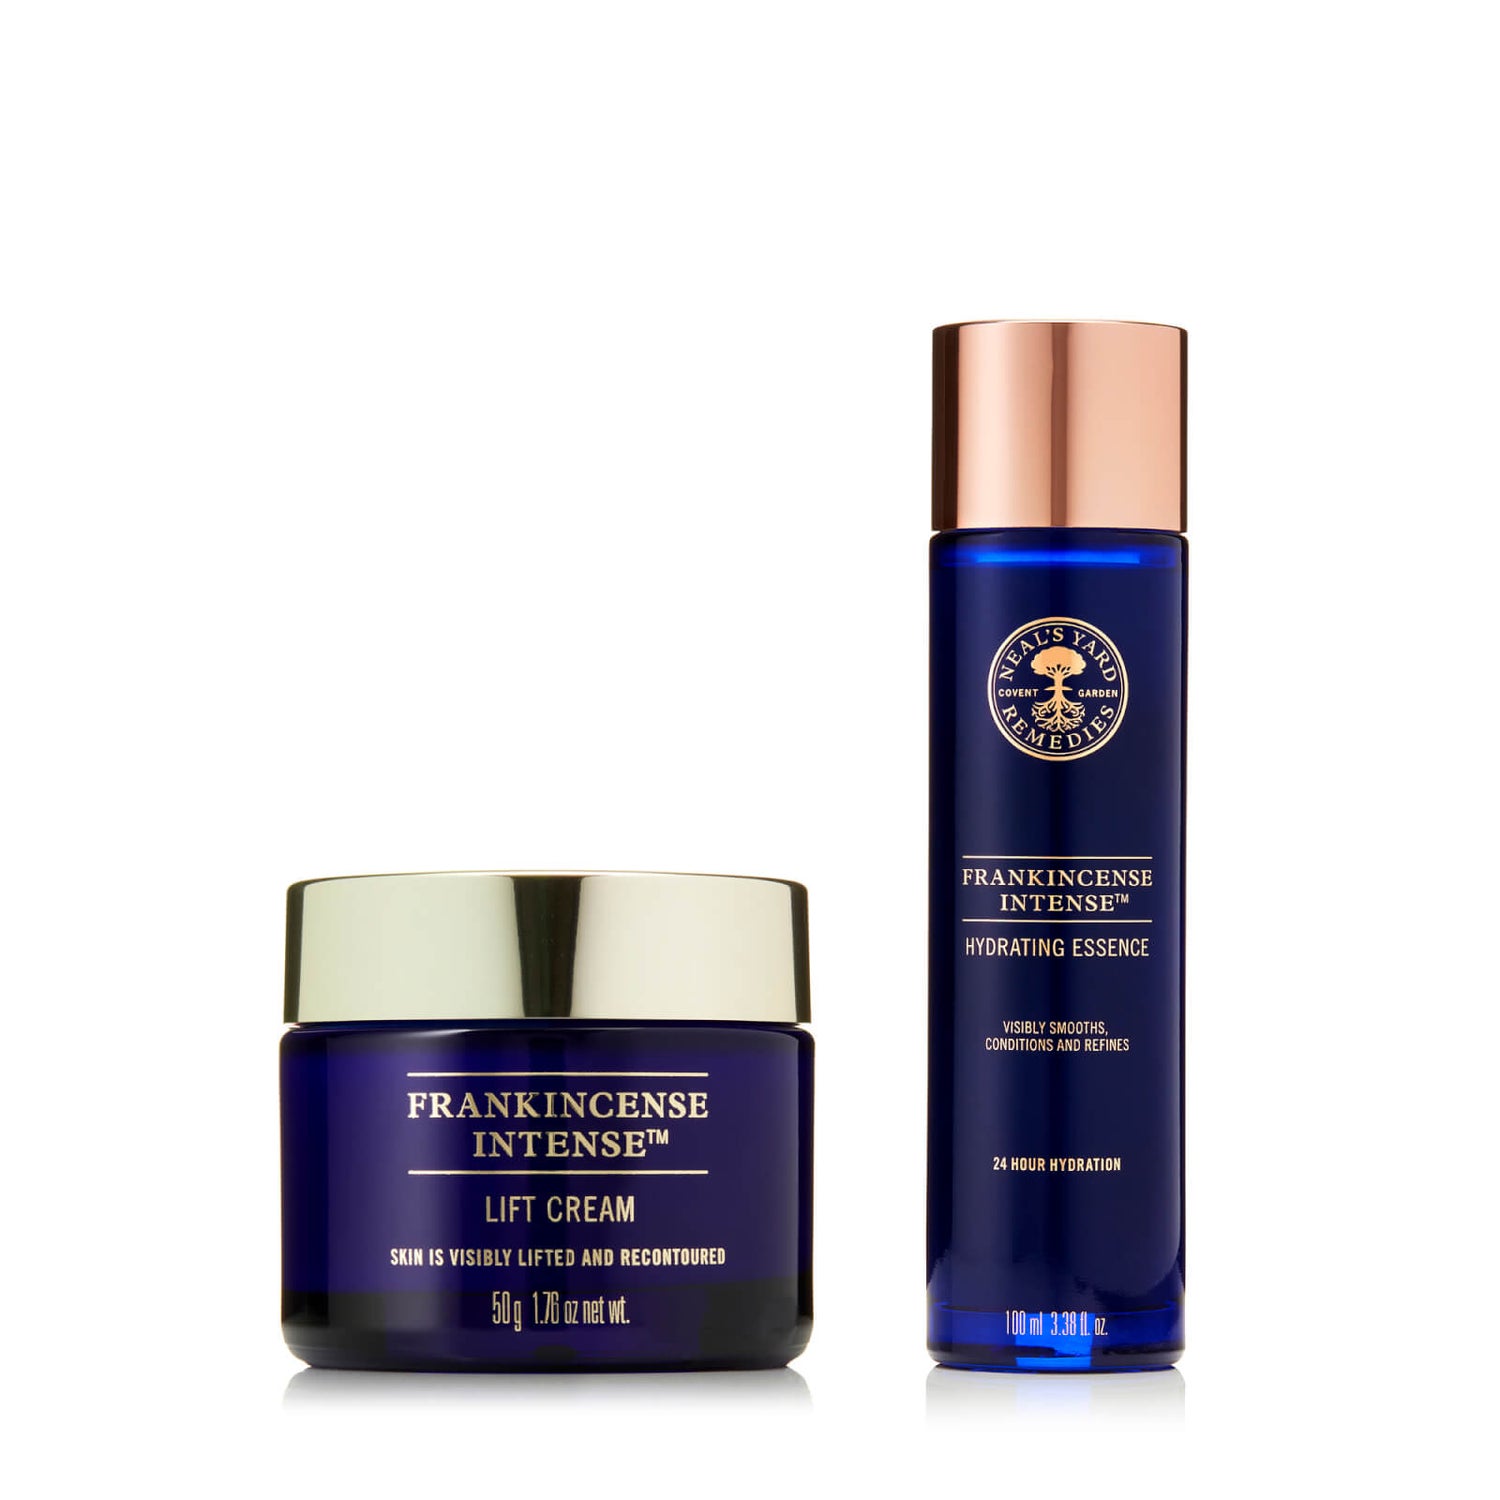 Frankincense Intense™ Hydration Duo